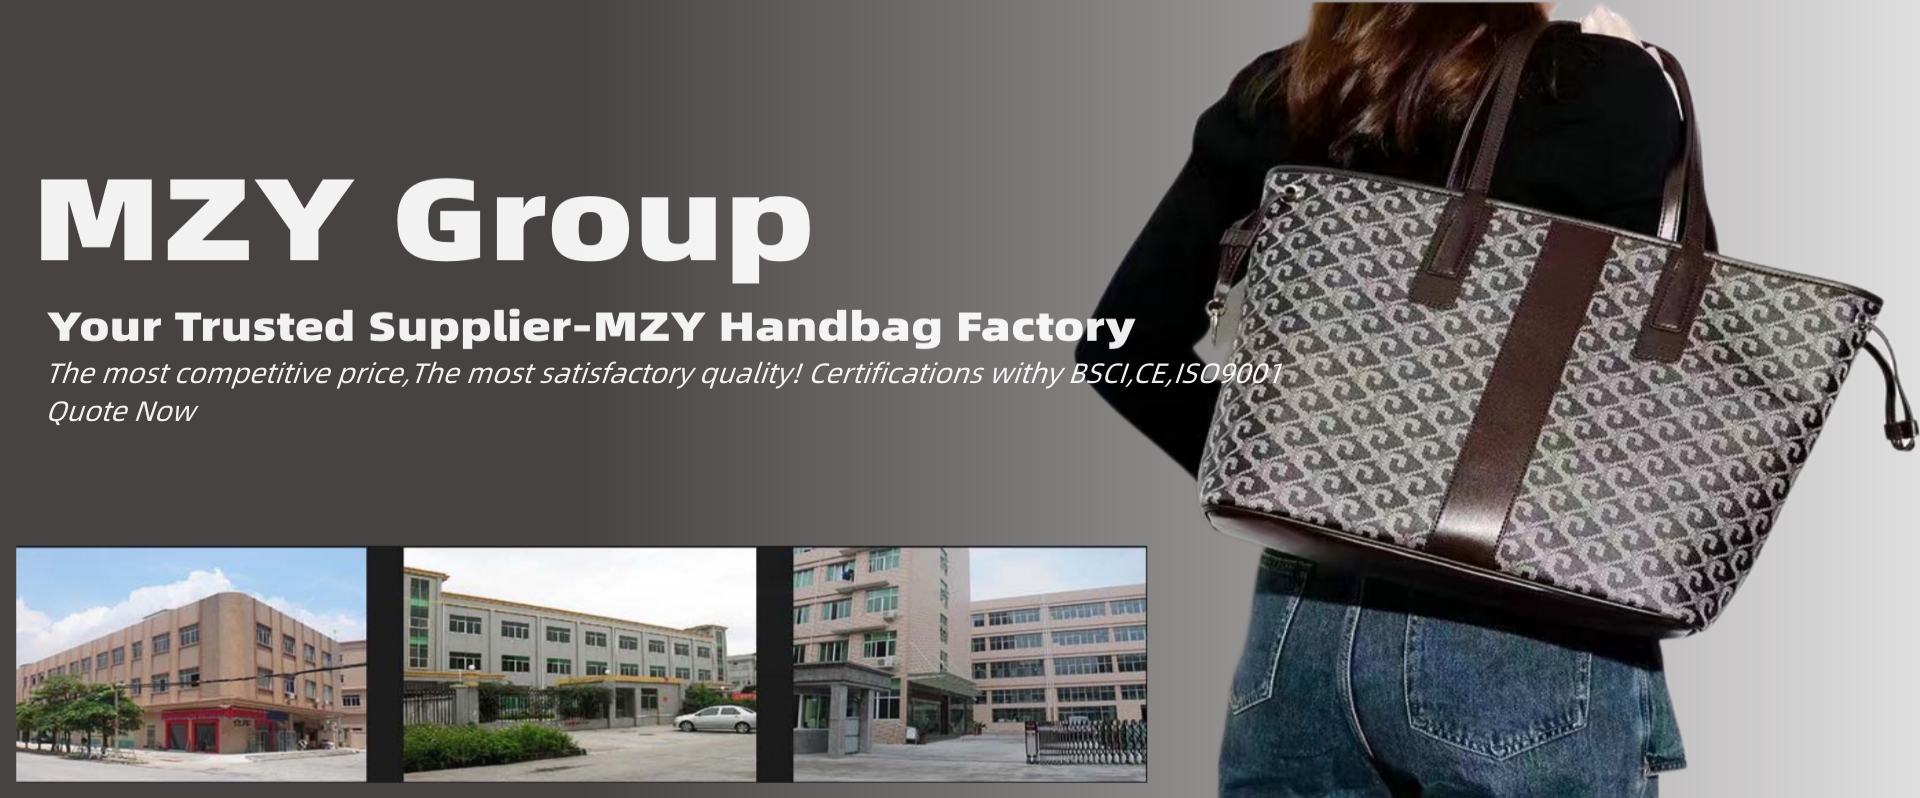 MZY Group Manufacturers